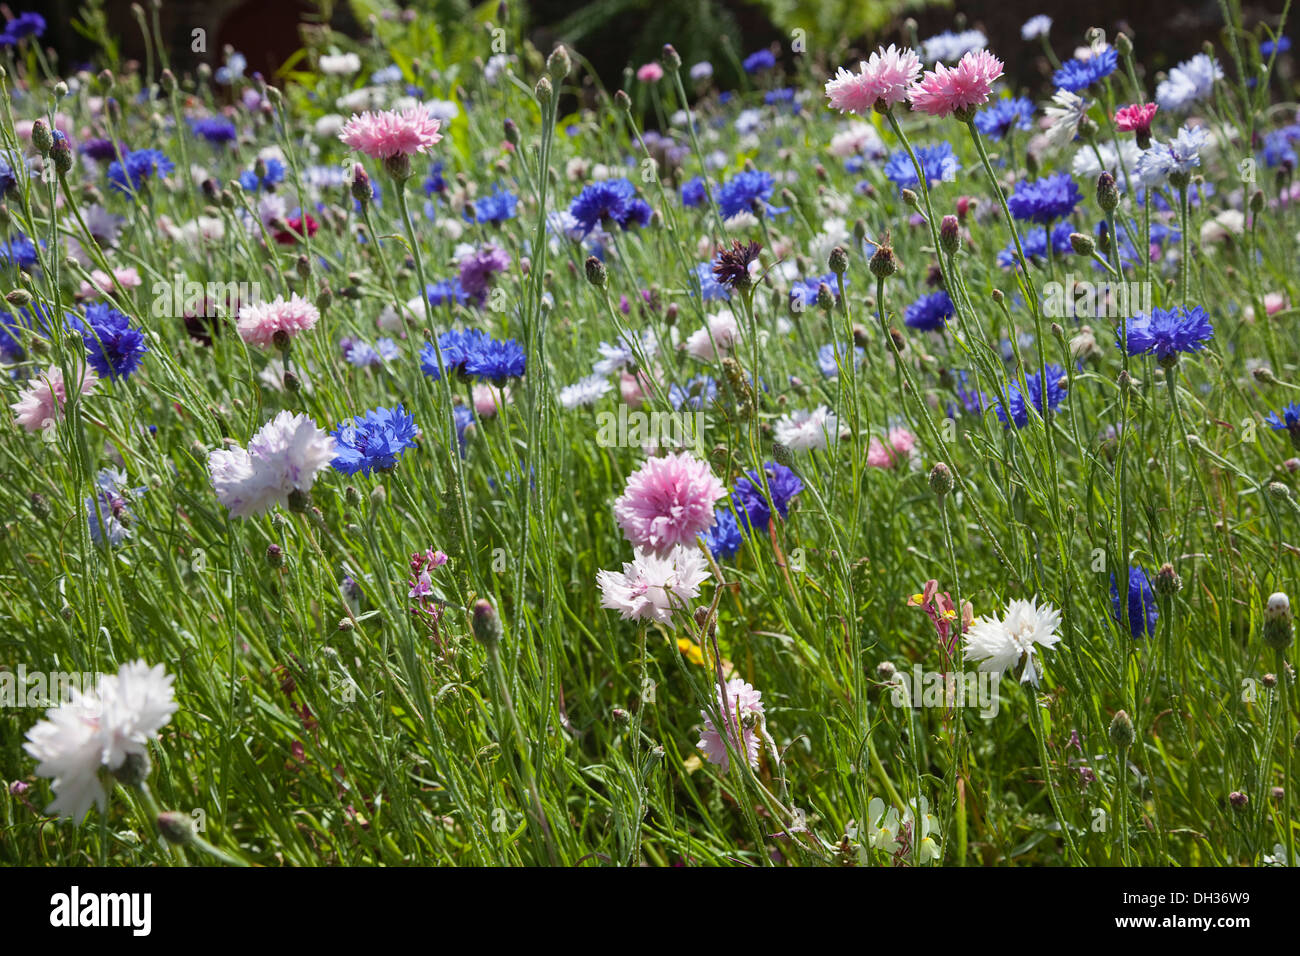 Cornflower Centaurea cyanus. Meadow of mixed wild flowers including white  pink and blue cornflowers. England West Sussex Stock Photo - Alamy